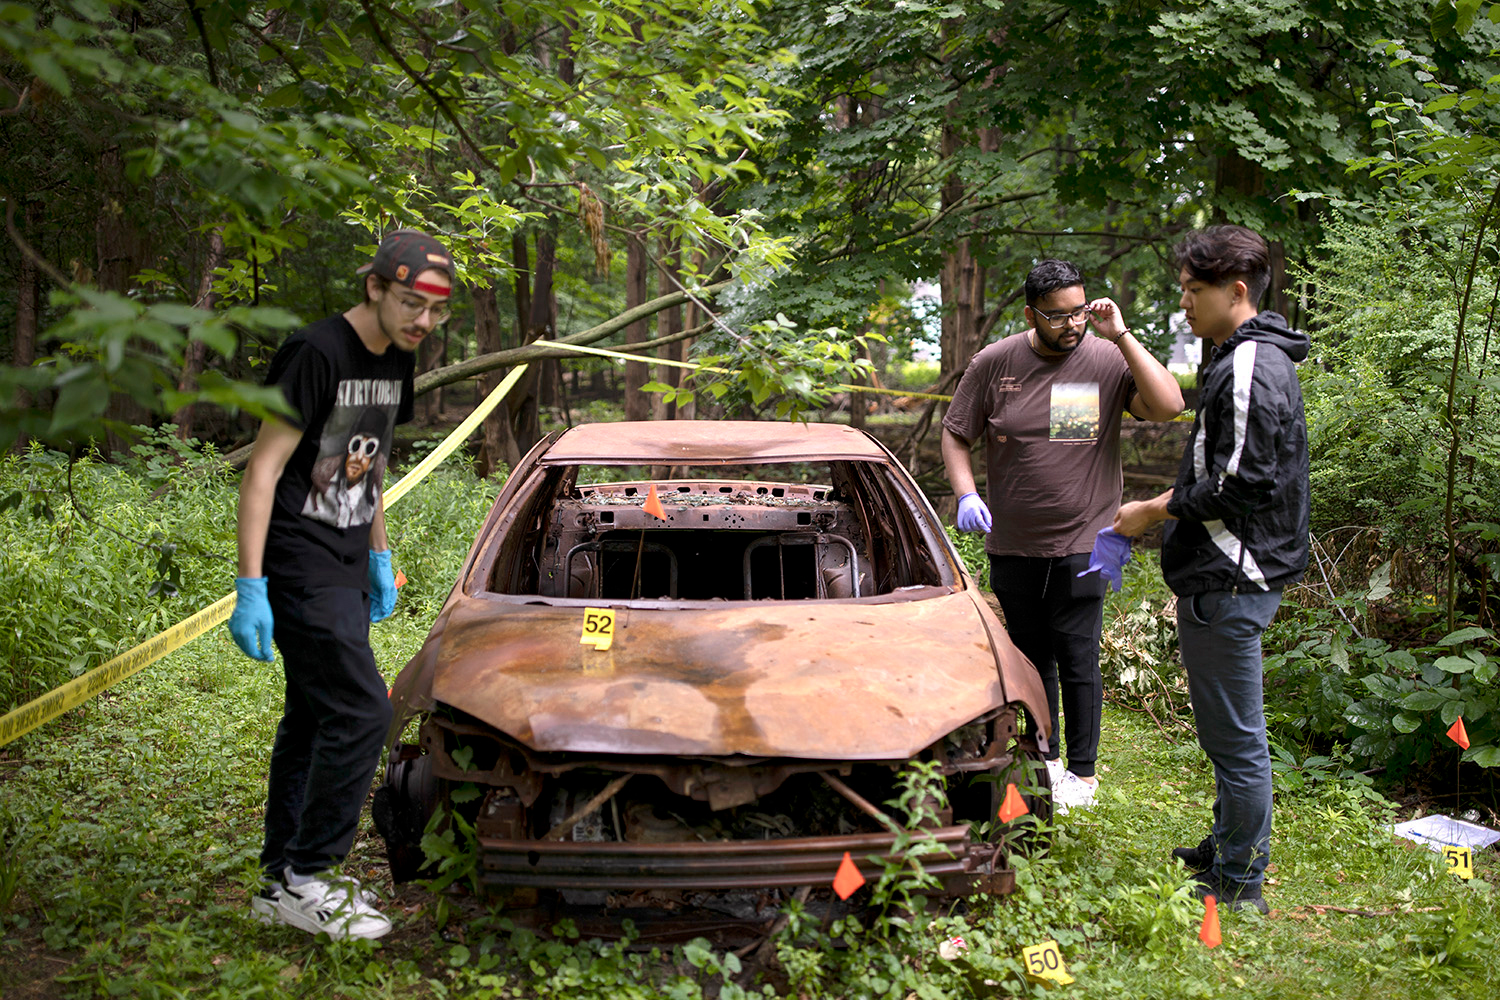 Three students wearing blue gloves examine a broken, rusted car in a forest area, marked 